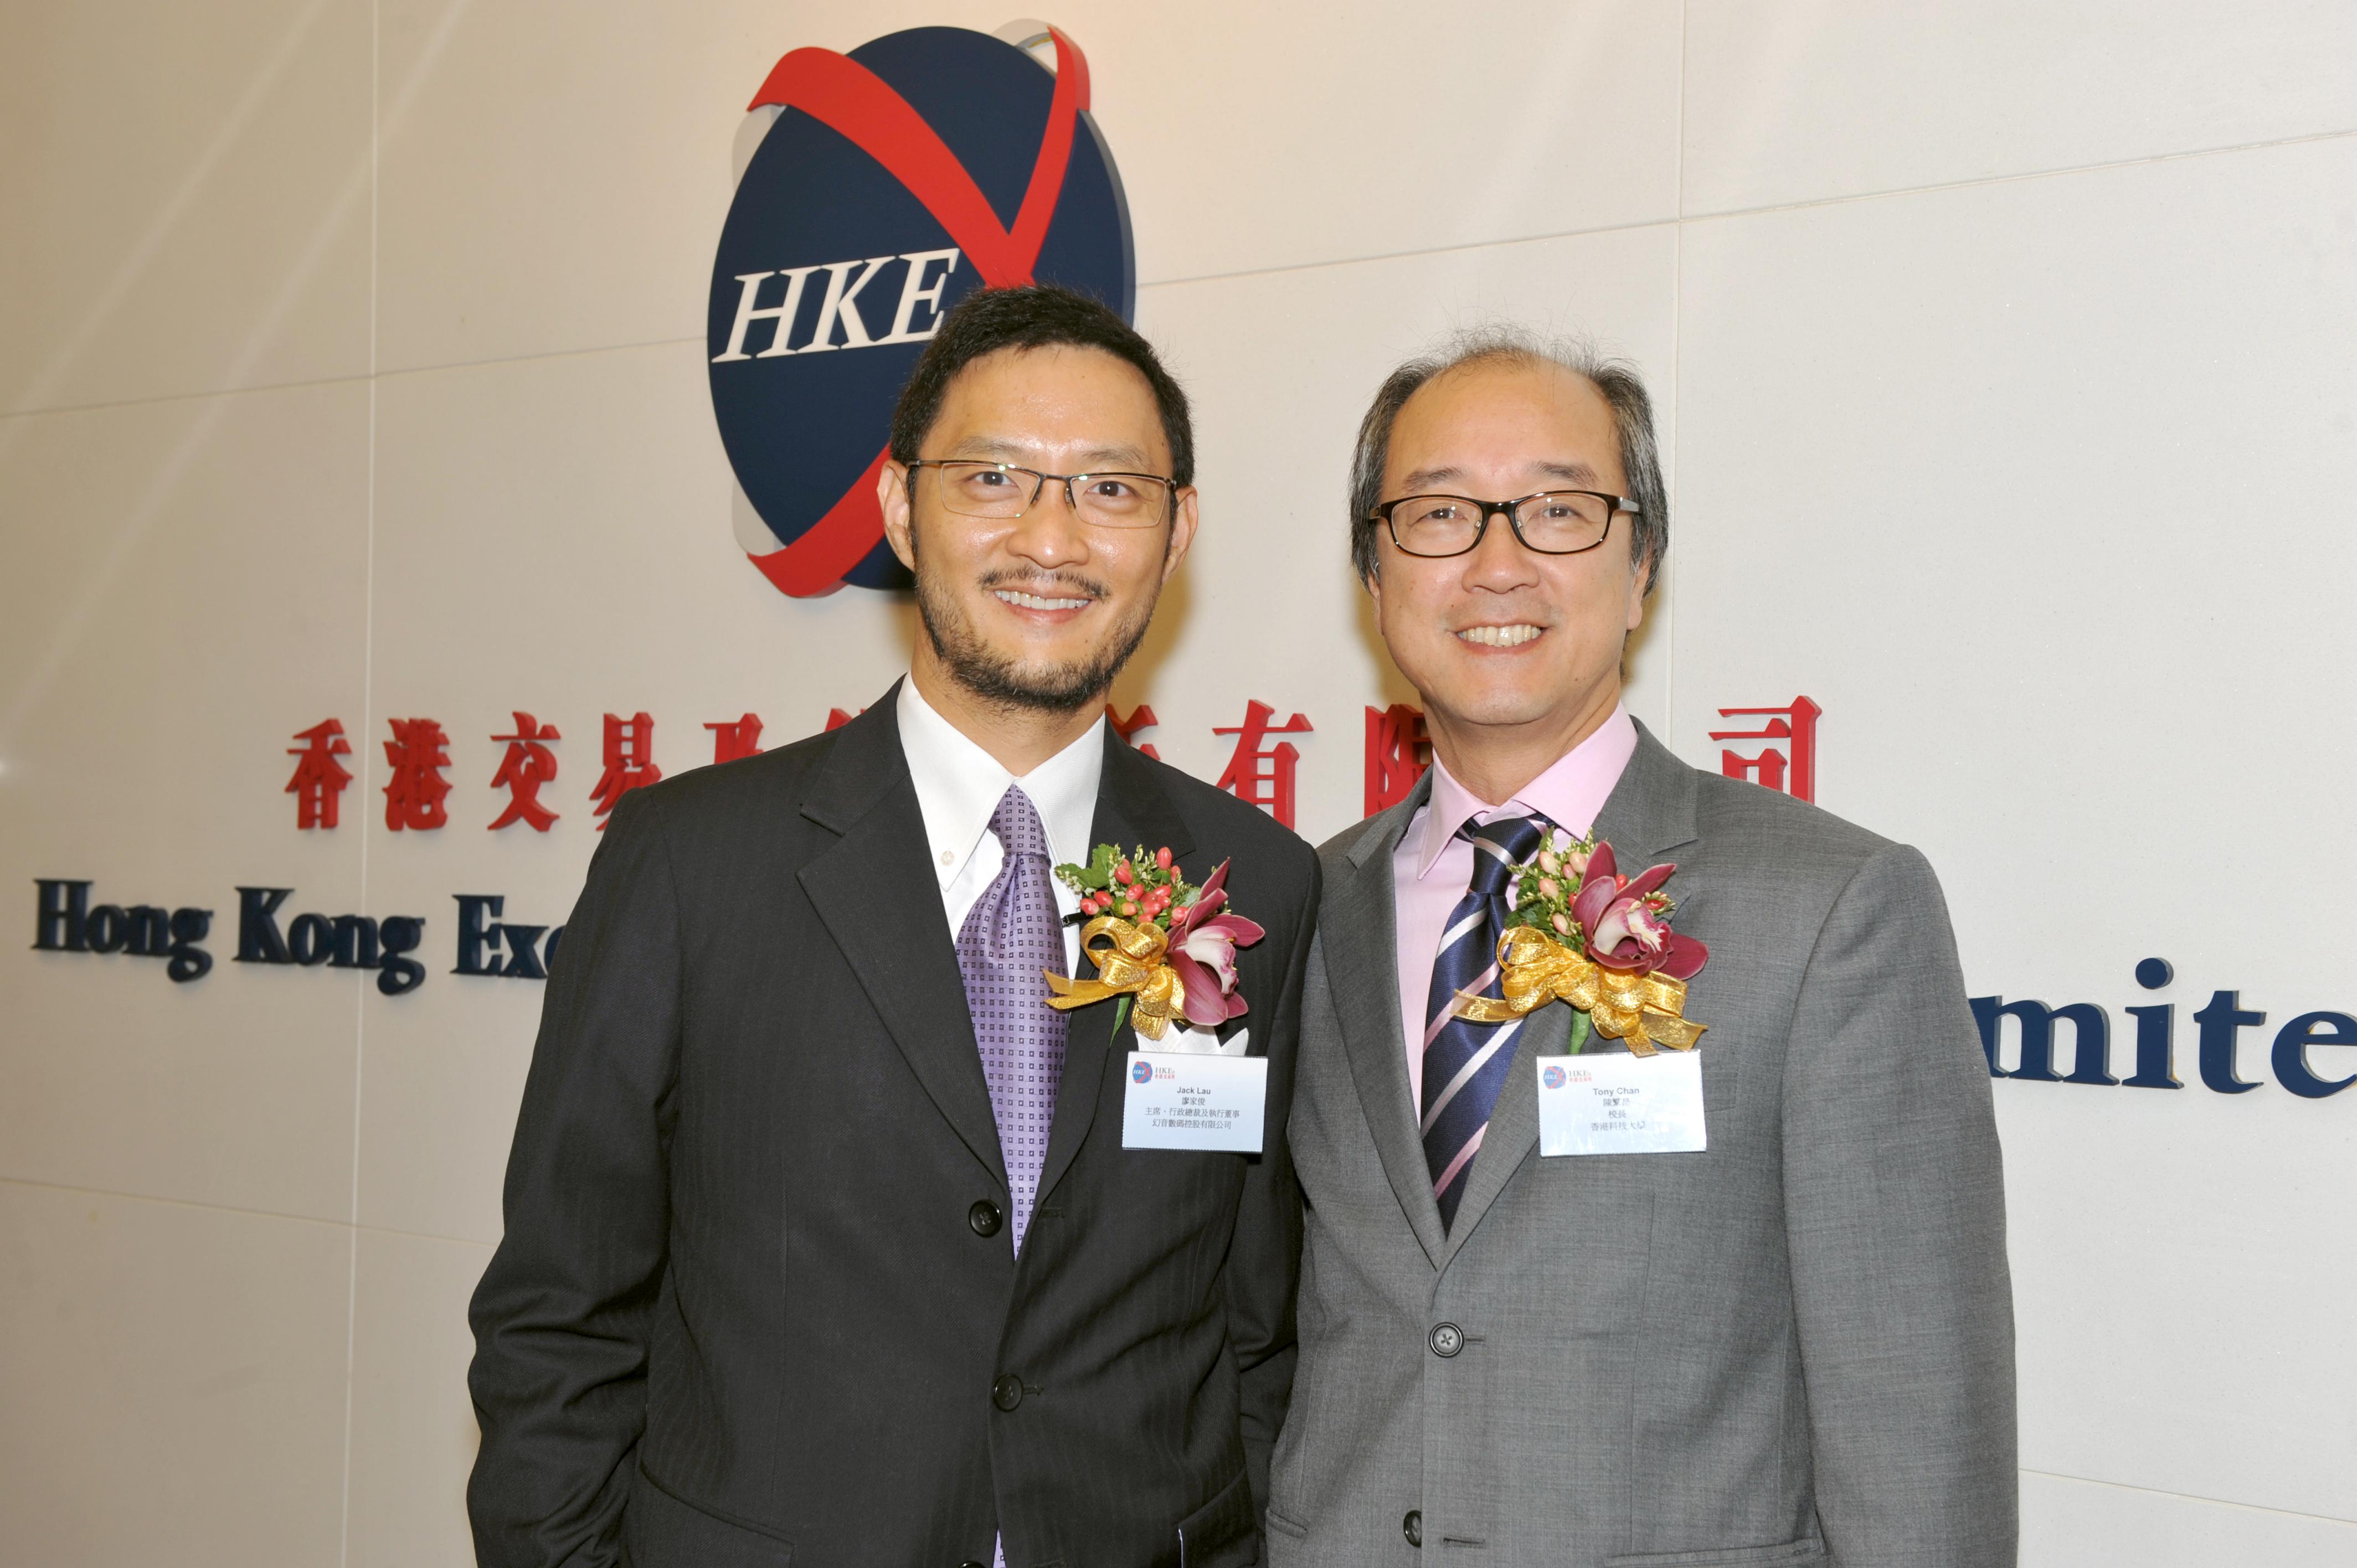 HKUST President Tony F Chan (right) and Dr Jack Lau at the listing ceremony.